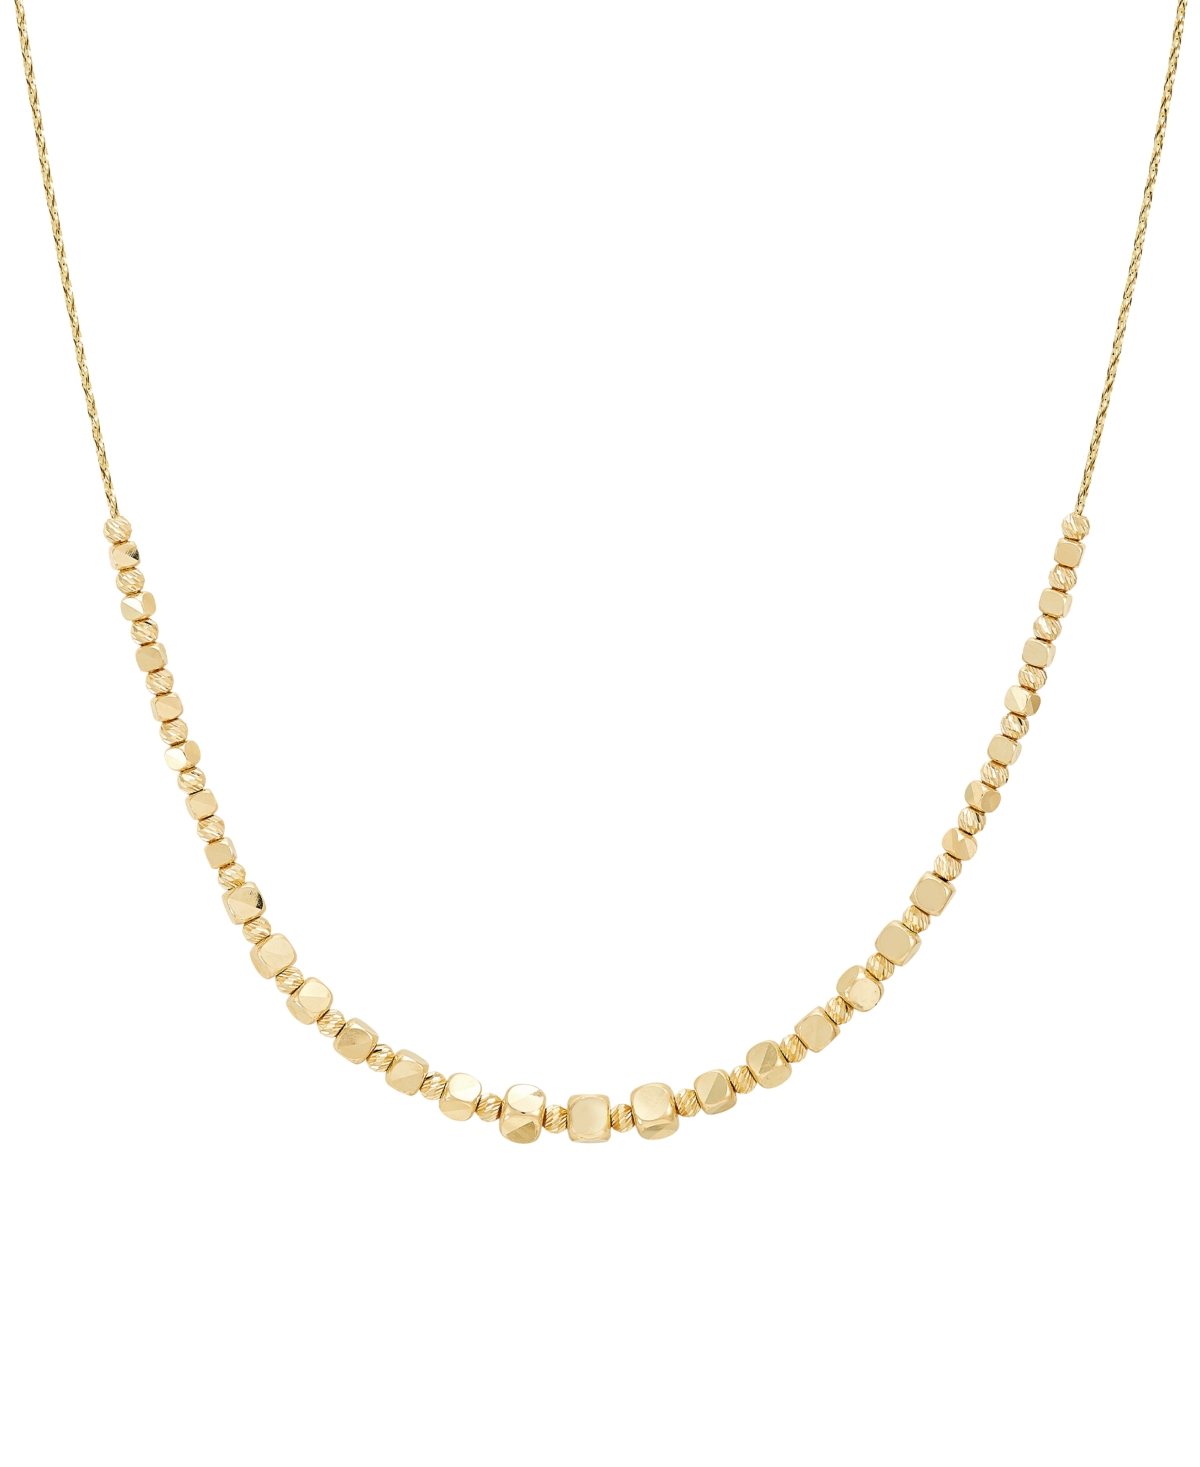 Italian Gold Polished & Textured Bead Collar Necklace In 10k Gold, 18" + 1" Extender